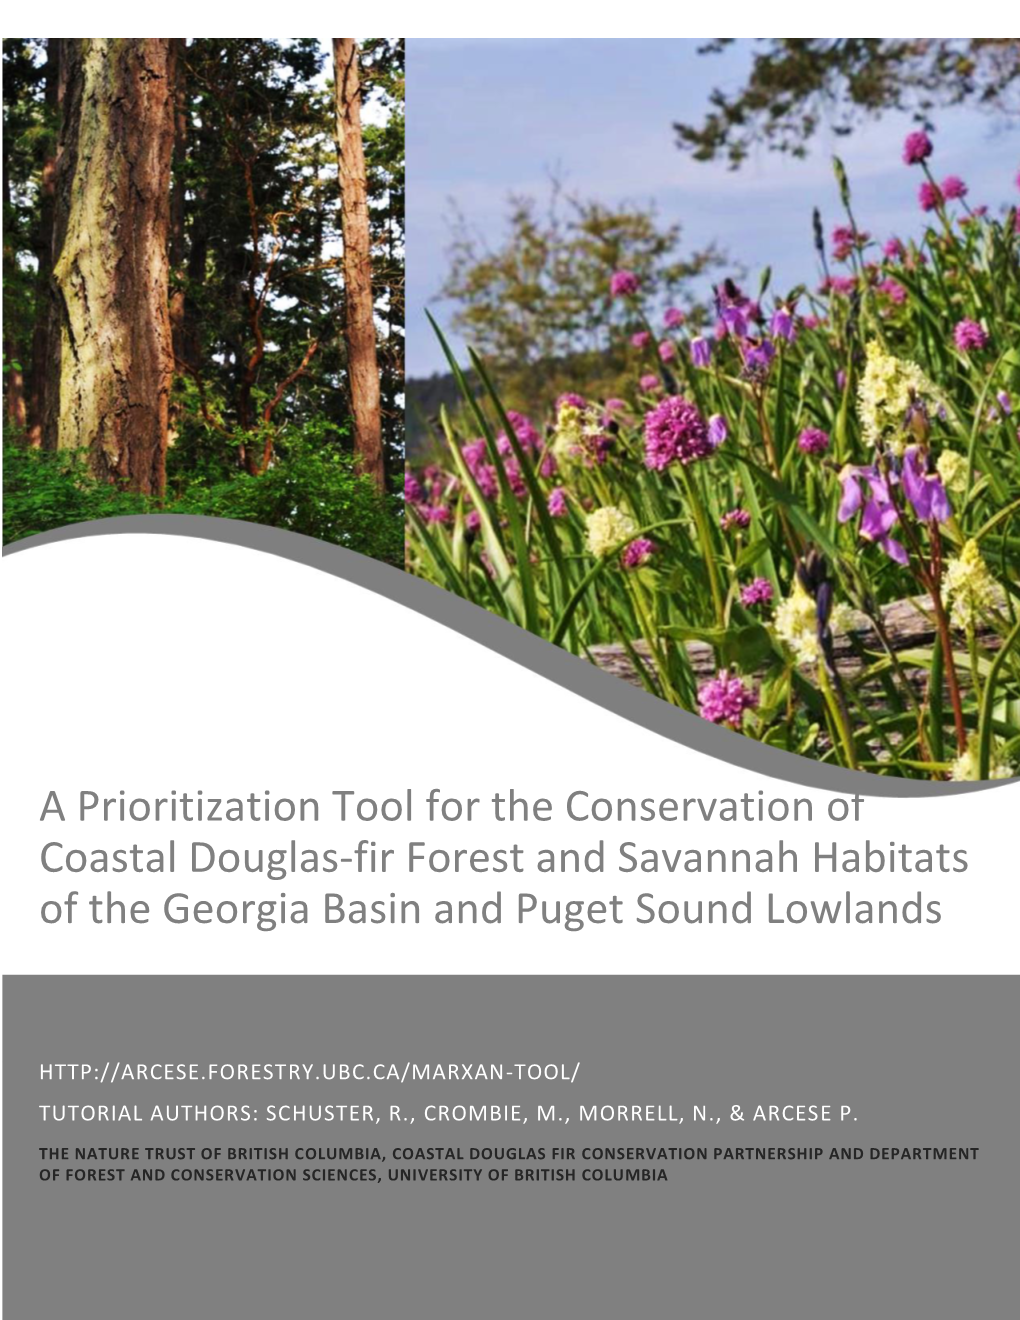 A Prioritization Tool for Douglas-Fir Forest and Savannah Habitats Of